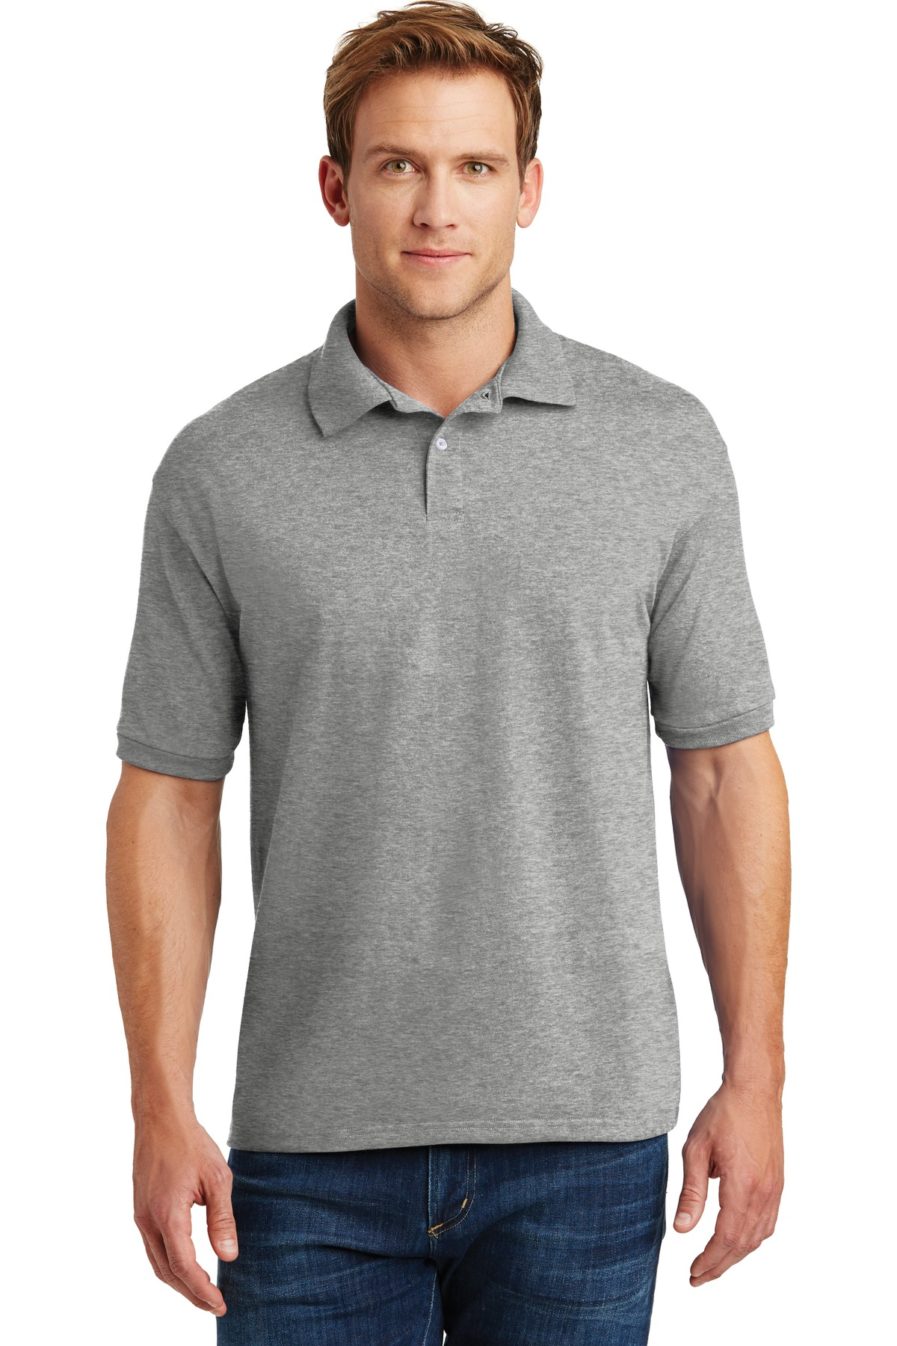 Light Steel polo on model with white buttons